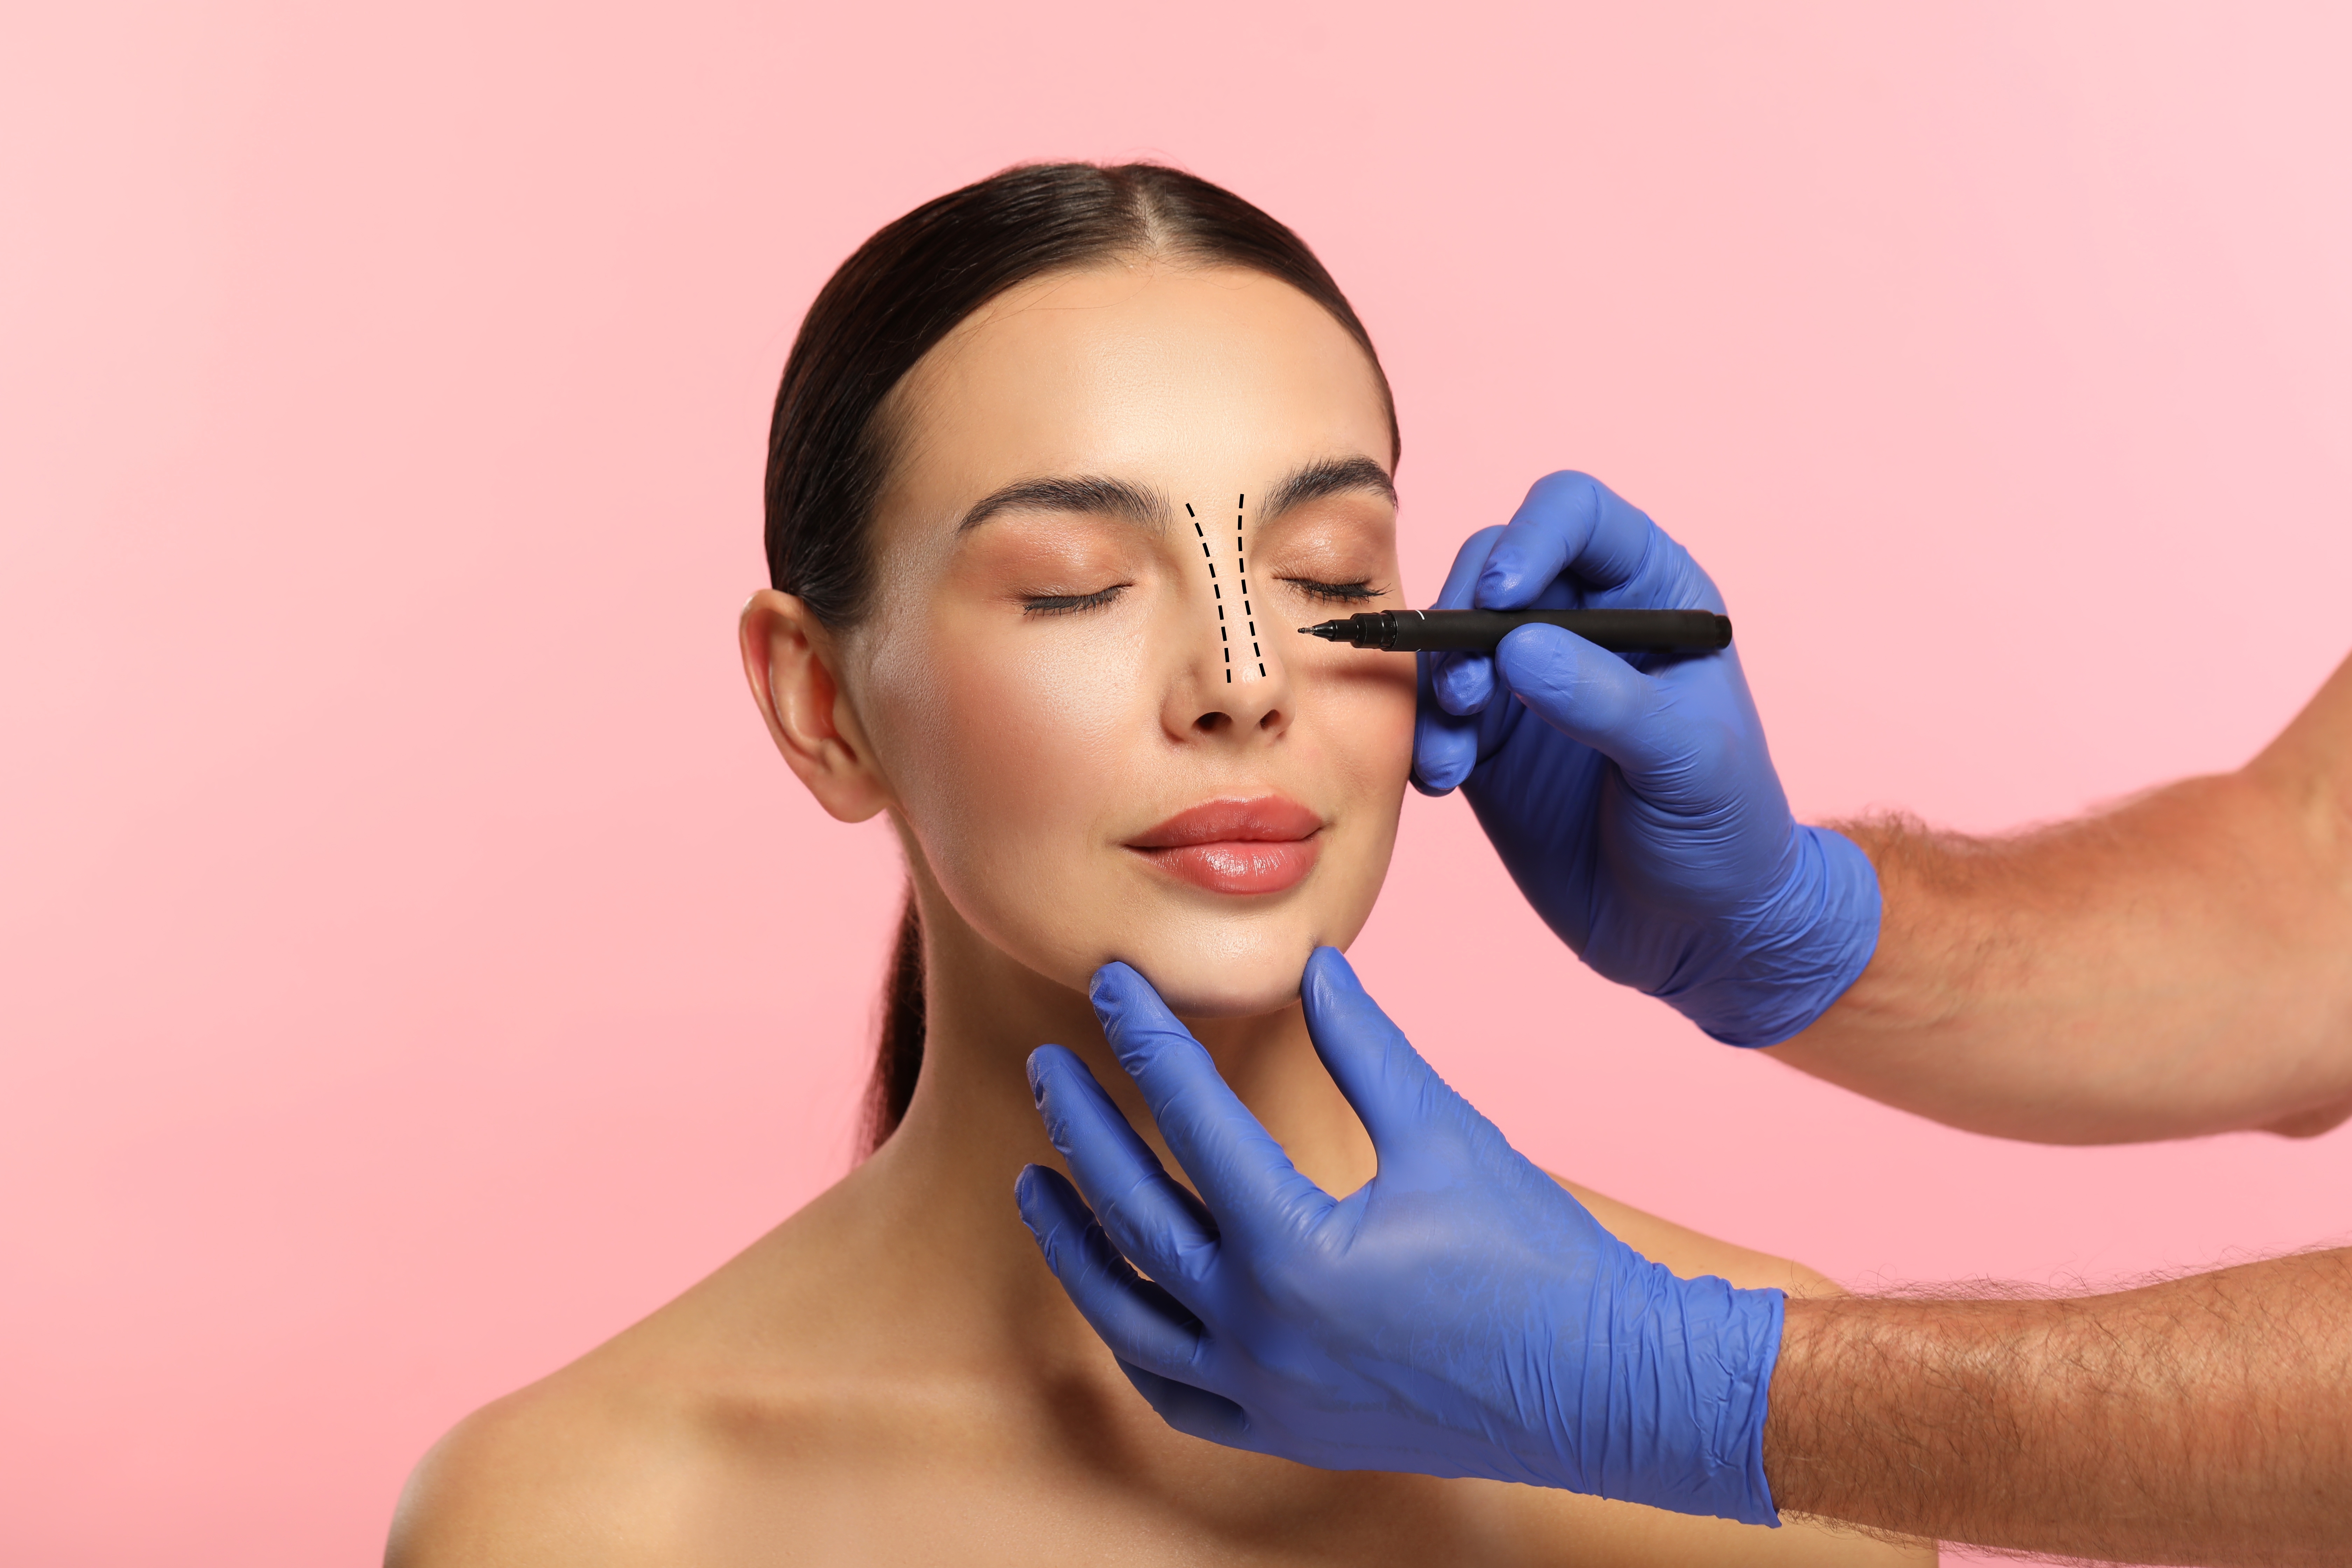 Different Rhinoplasty Techniques: Choosing the Approach That Fits Your Goals